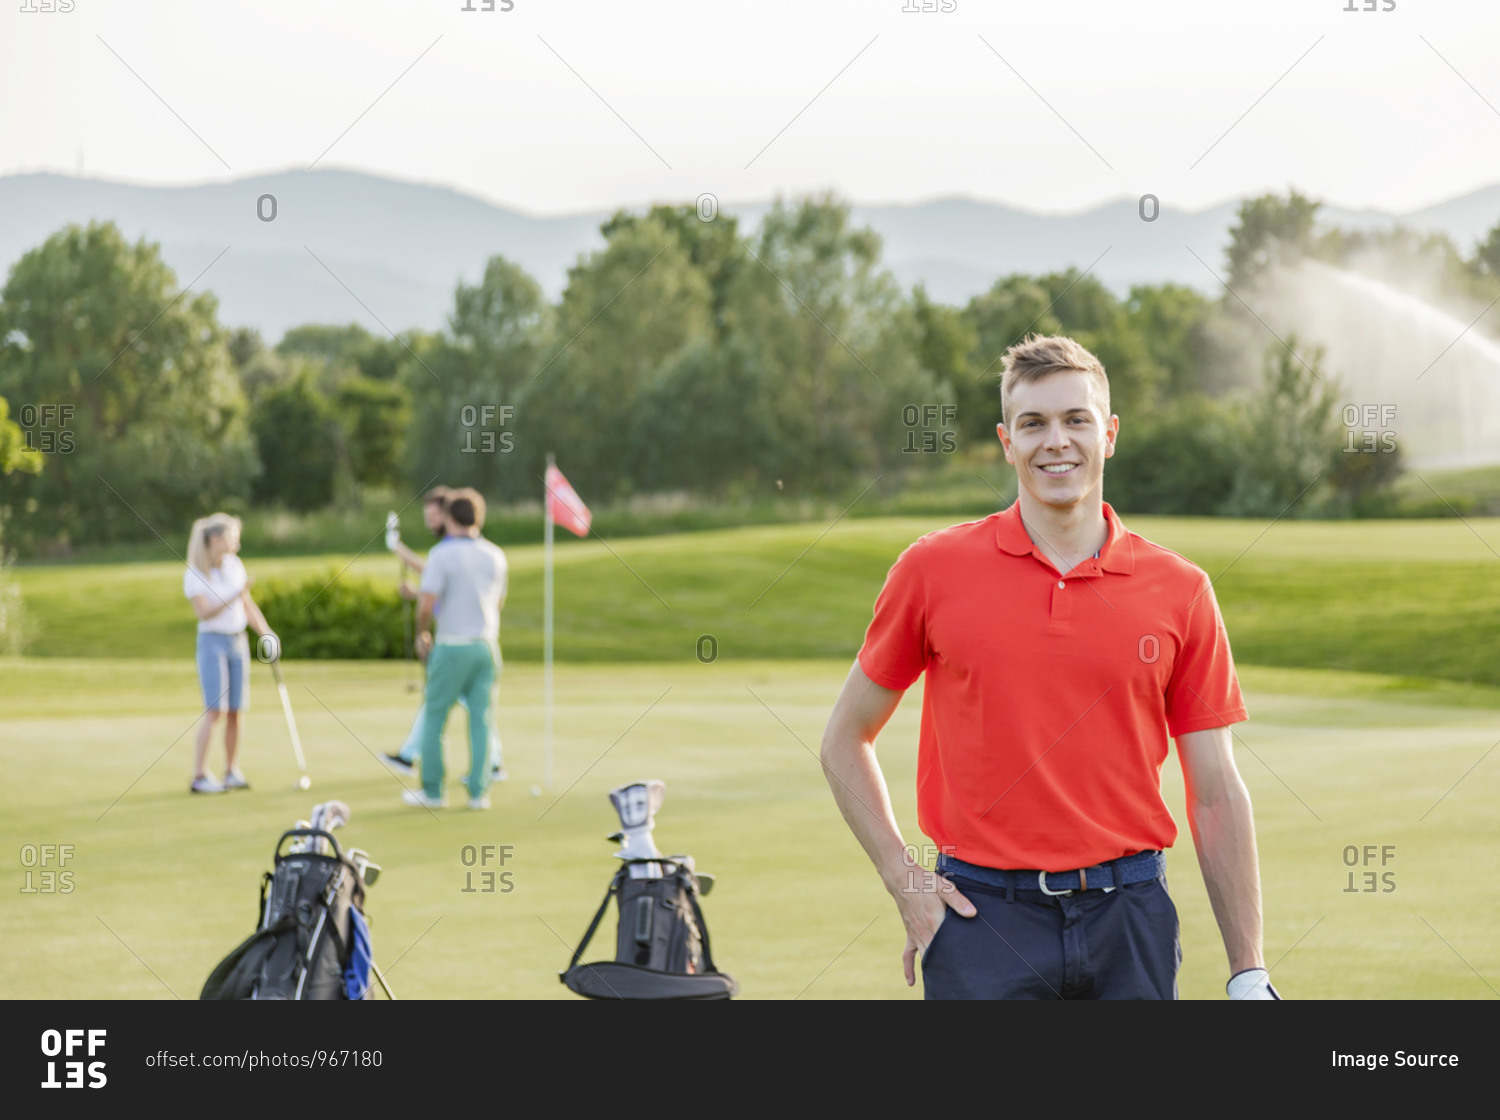 Man with friends playing golf on golf course in background